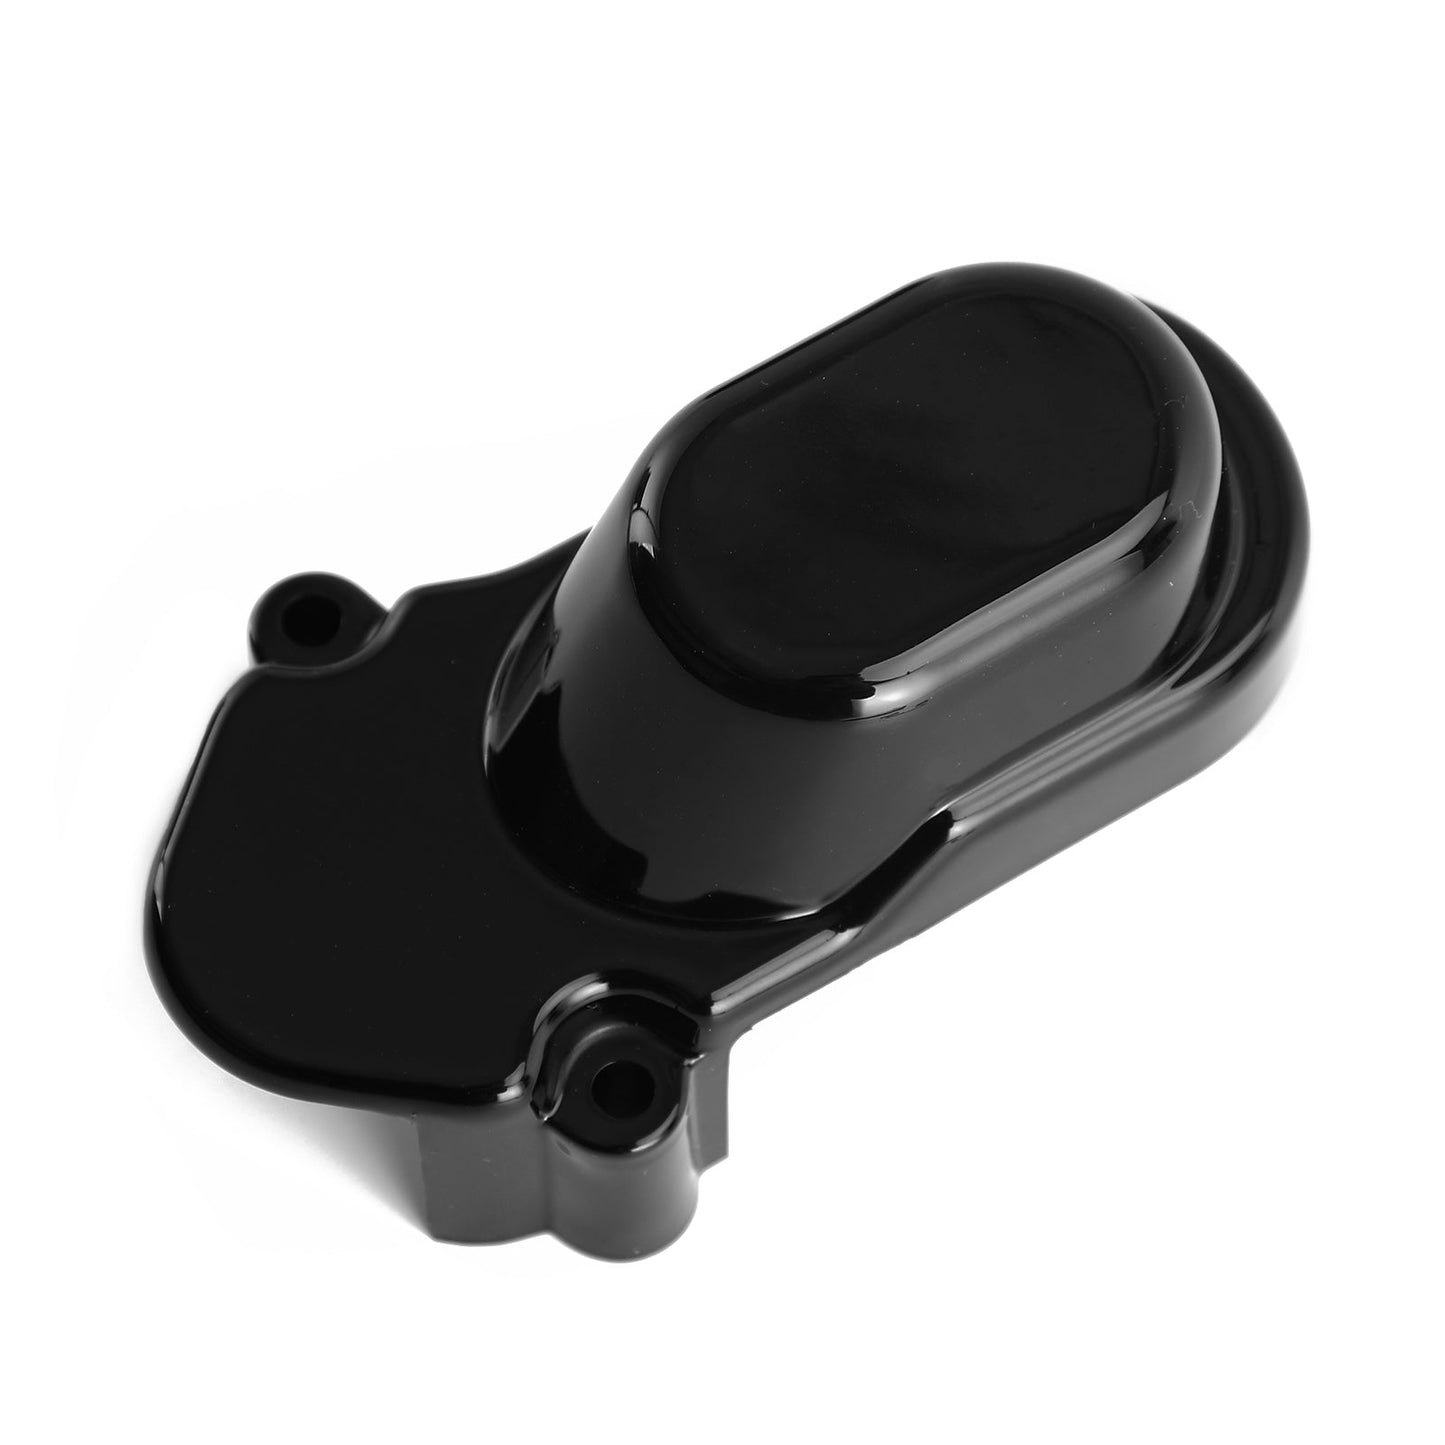 Rear Axle Cover Nut Bolt Cap For Sportster 1200 XL1200C 883 2005-2017 Black